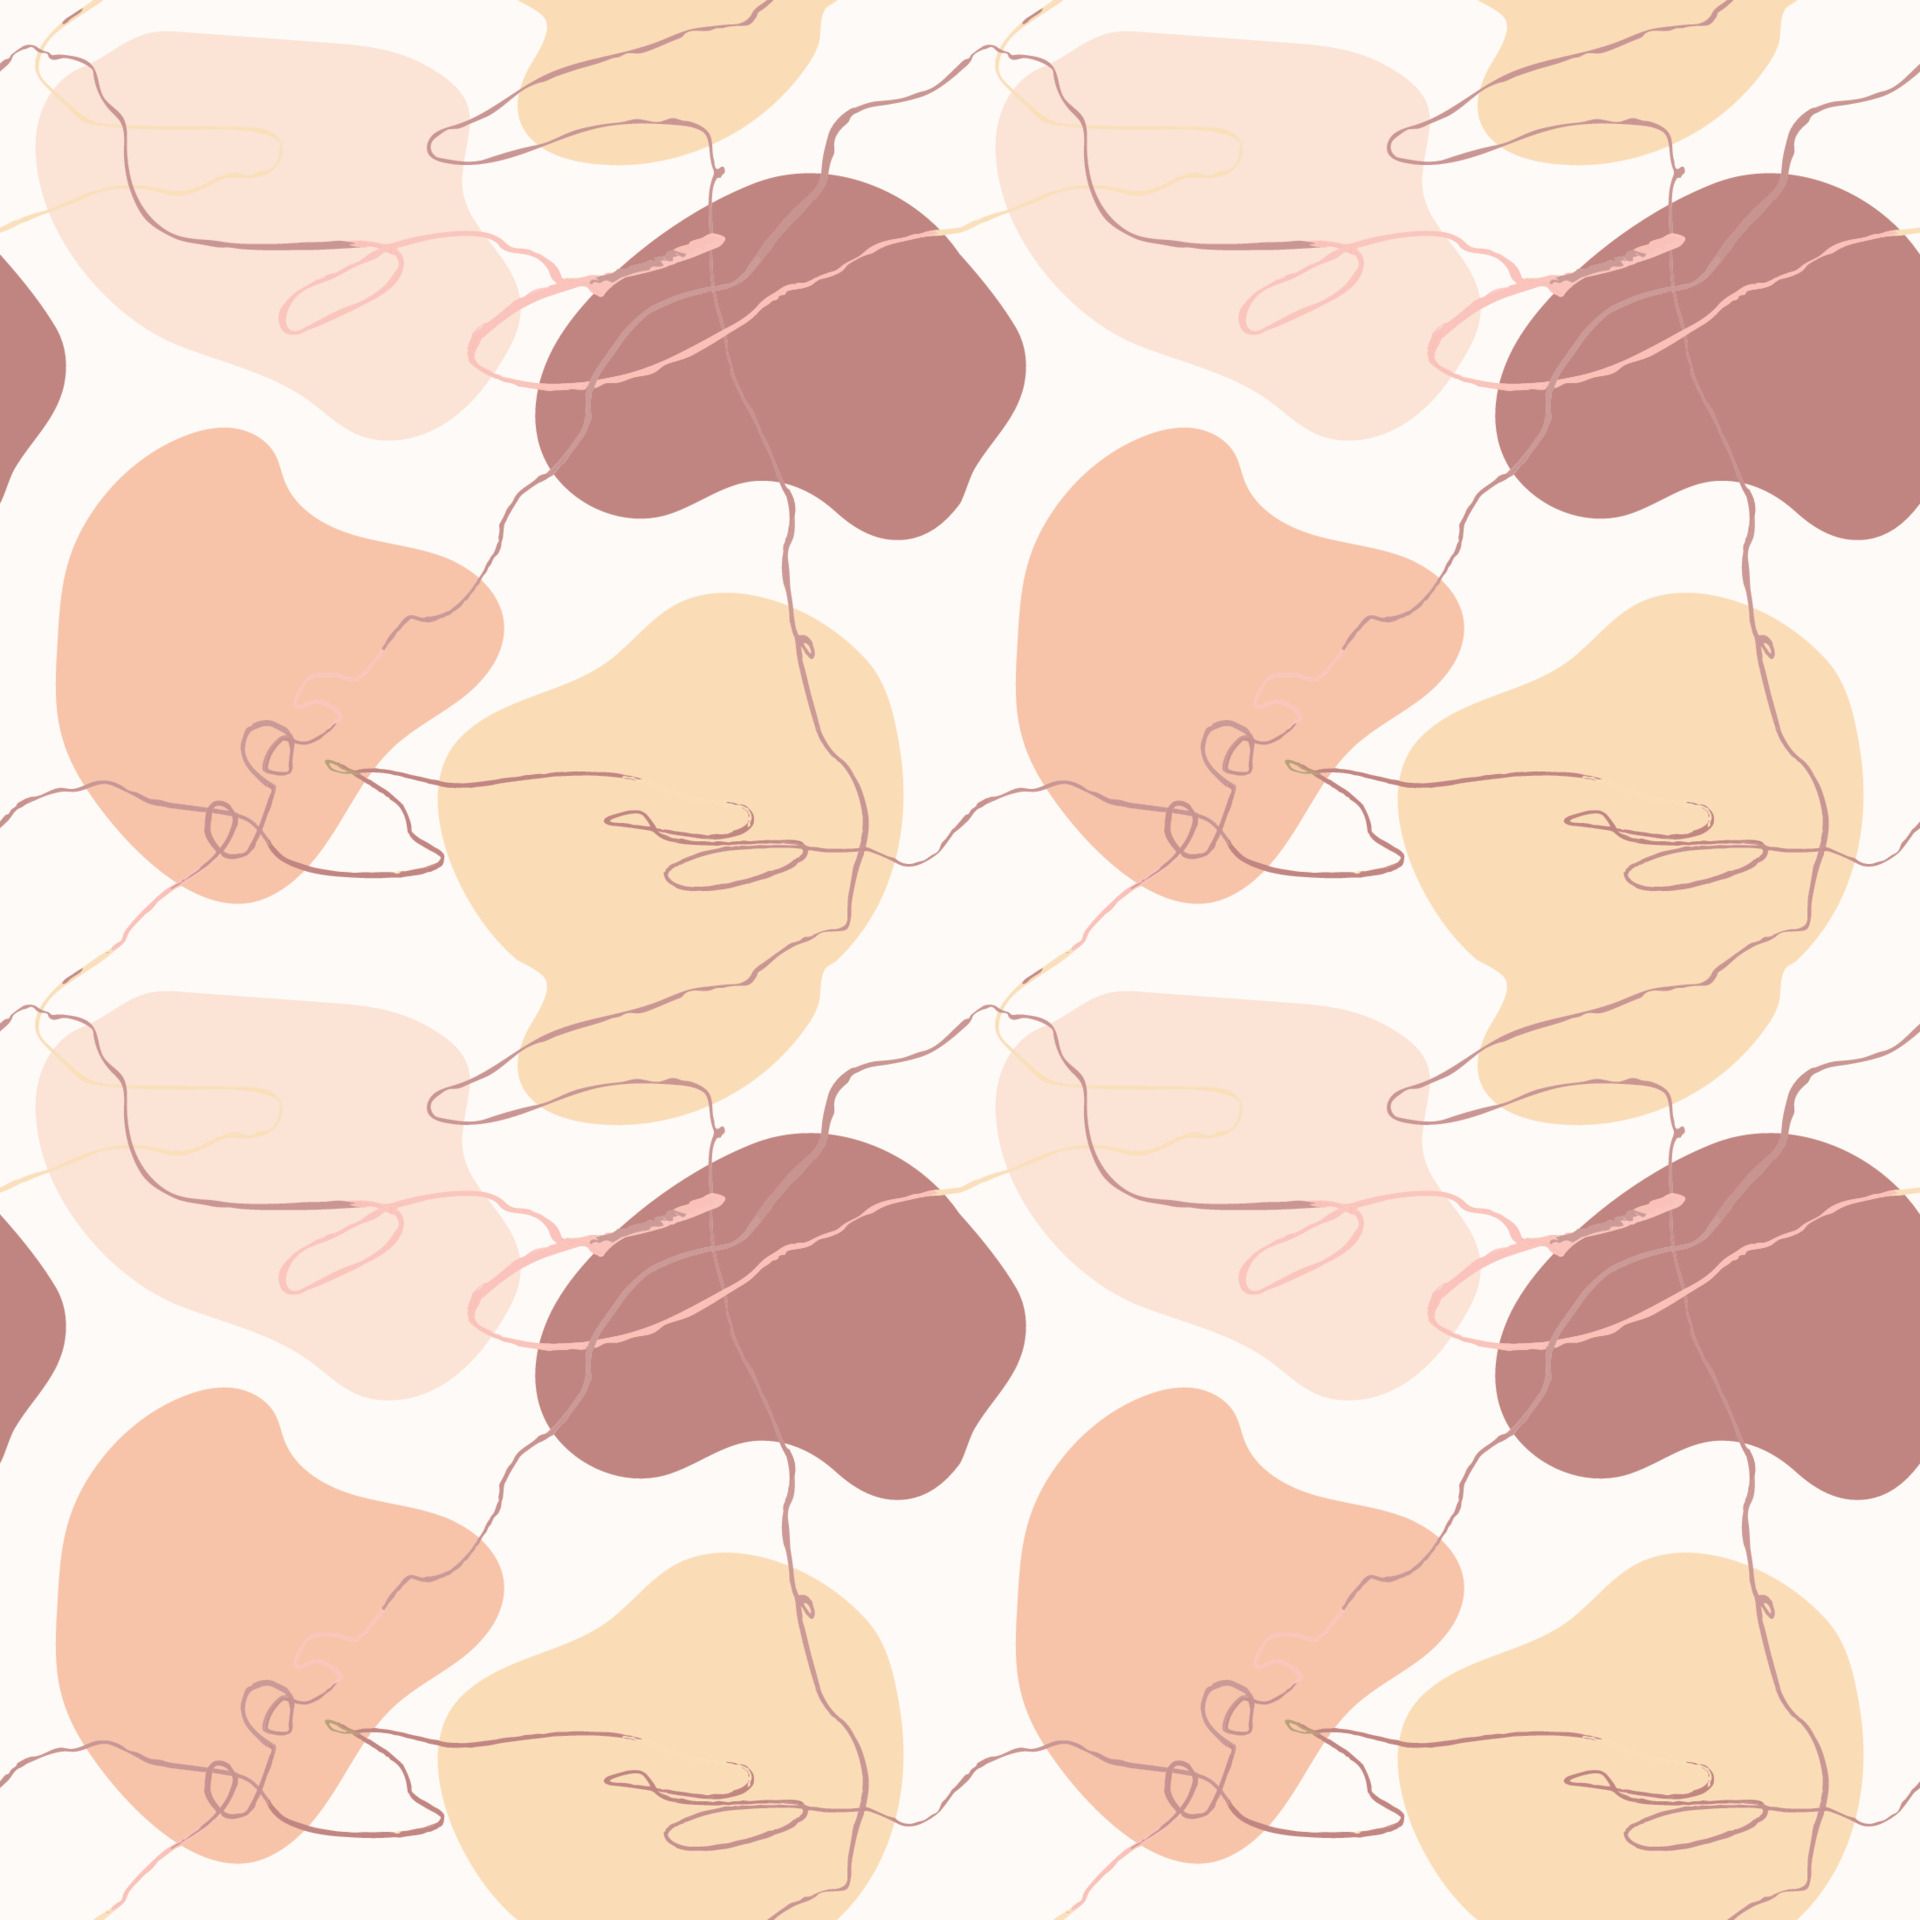 A pattern of abstract shapes in pink, brown and cream on a white background - Doodles